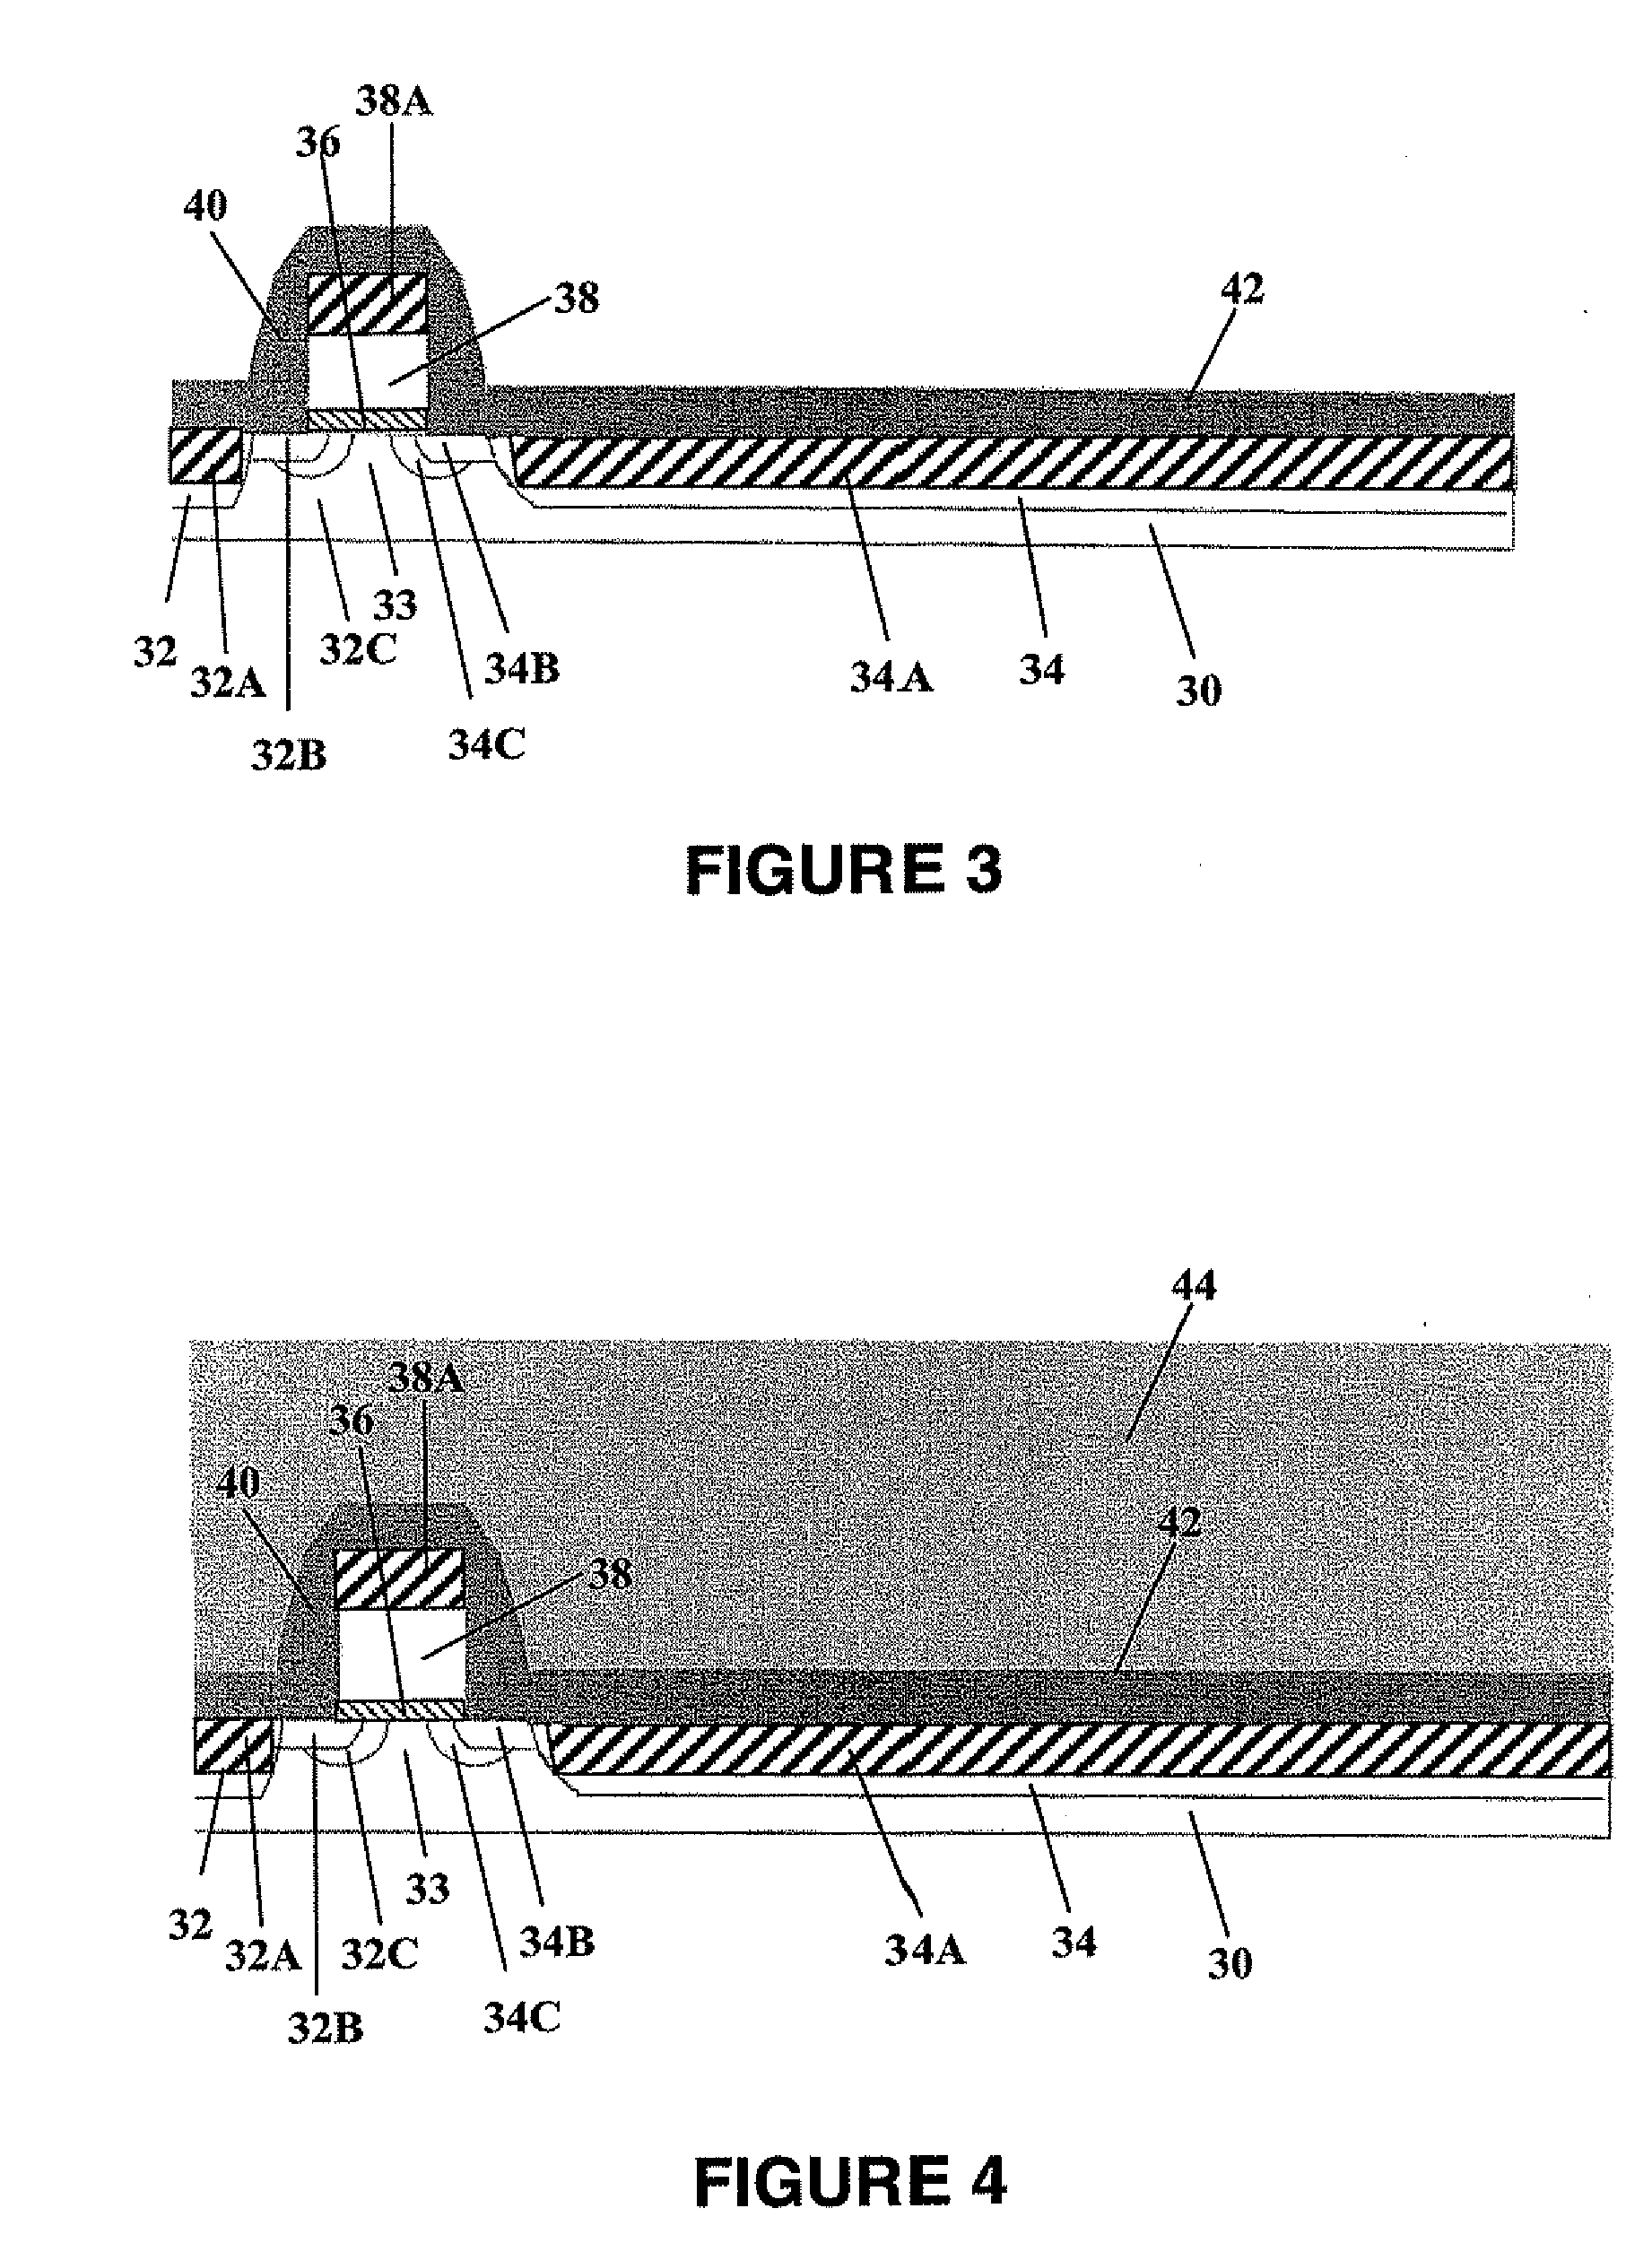 Field effect transistors (FETS) with inverted source/drain metallic contacts, and method of fabricating same